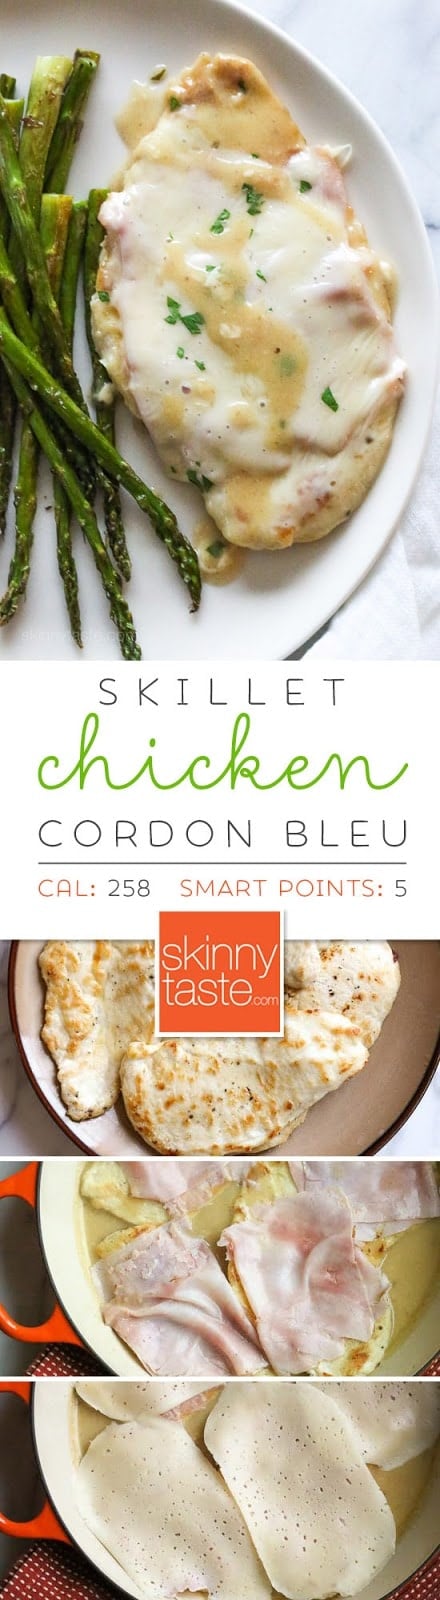 Skillet Chicken Cordon Bleu – this quick, light chicken dish is inspired by one of my favorite dishes – chicken cordon bleu without the rolling, breading and baking. It's delicious, low carb and perfect for weeknight cooking!